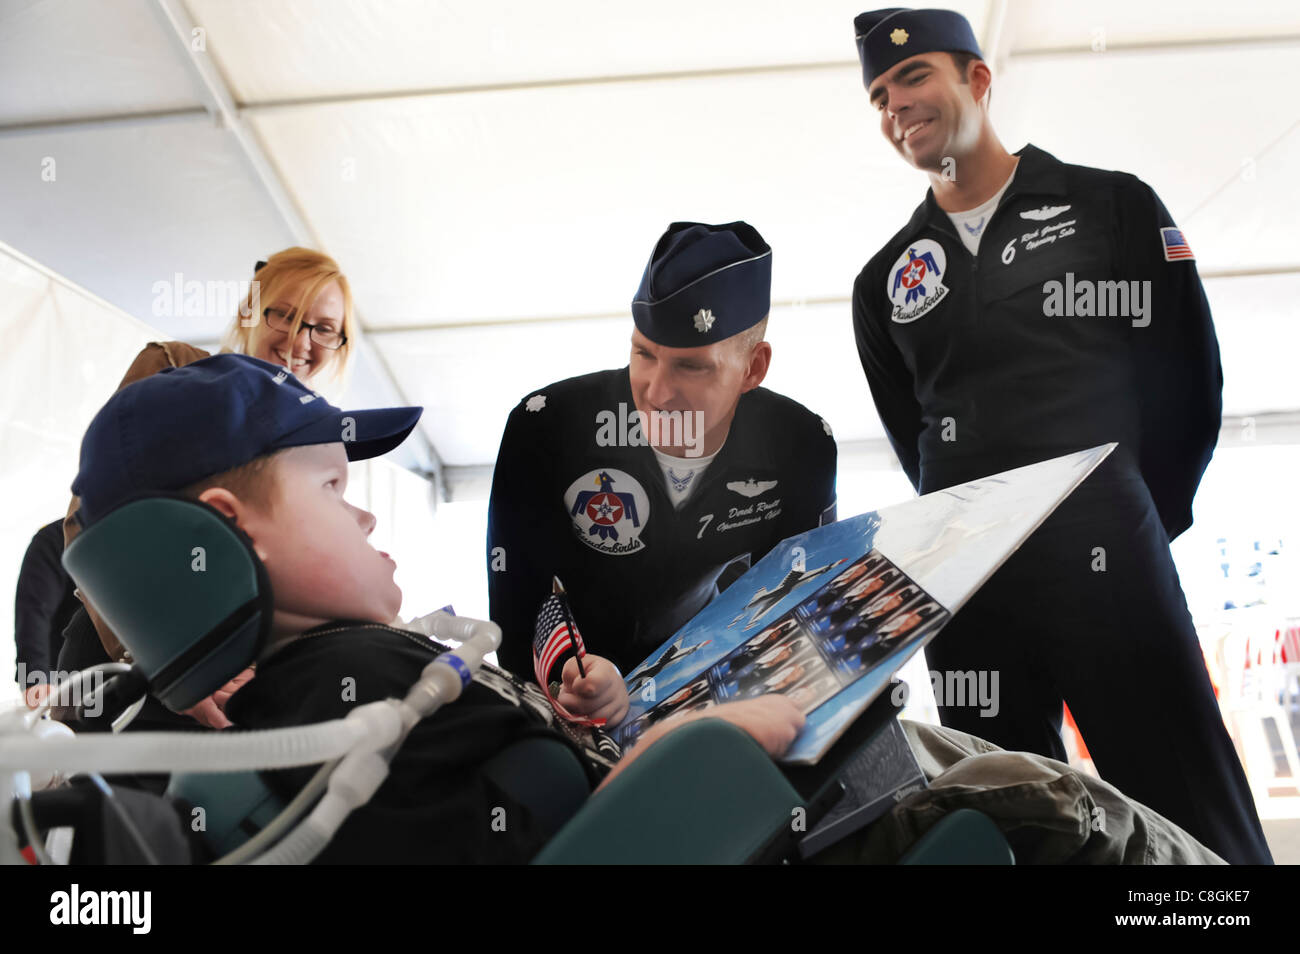 att Dembik Jr., a nine-year-old diagnosed with spinal muscular atrophy, gets an autograph from Thunderbirds operations officer Lt. Col. Derek Routt and solo pilot Maj. Rick Goodman during the rehearsal show for the Nellis Air Force Base, Nev., Open House Nov. 13, 2009. Matt was invited to attend the rehearsal through the Make-a-Wish Foundation, a non-profit organization aimed toward granting wishes of children with life-threatening conditions. Stock Photo